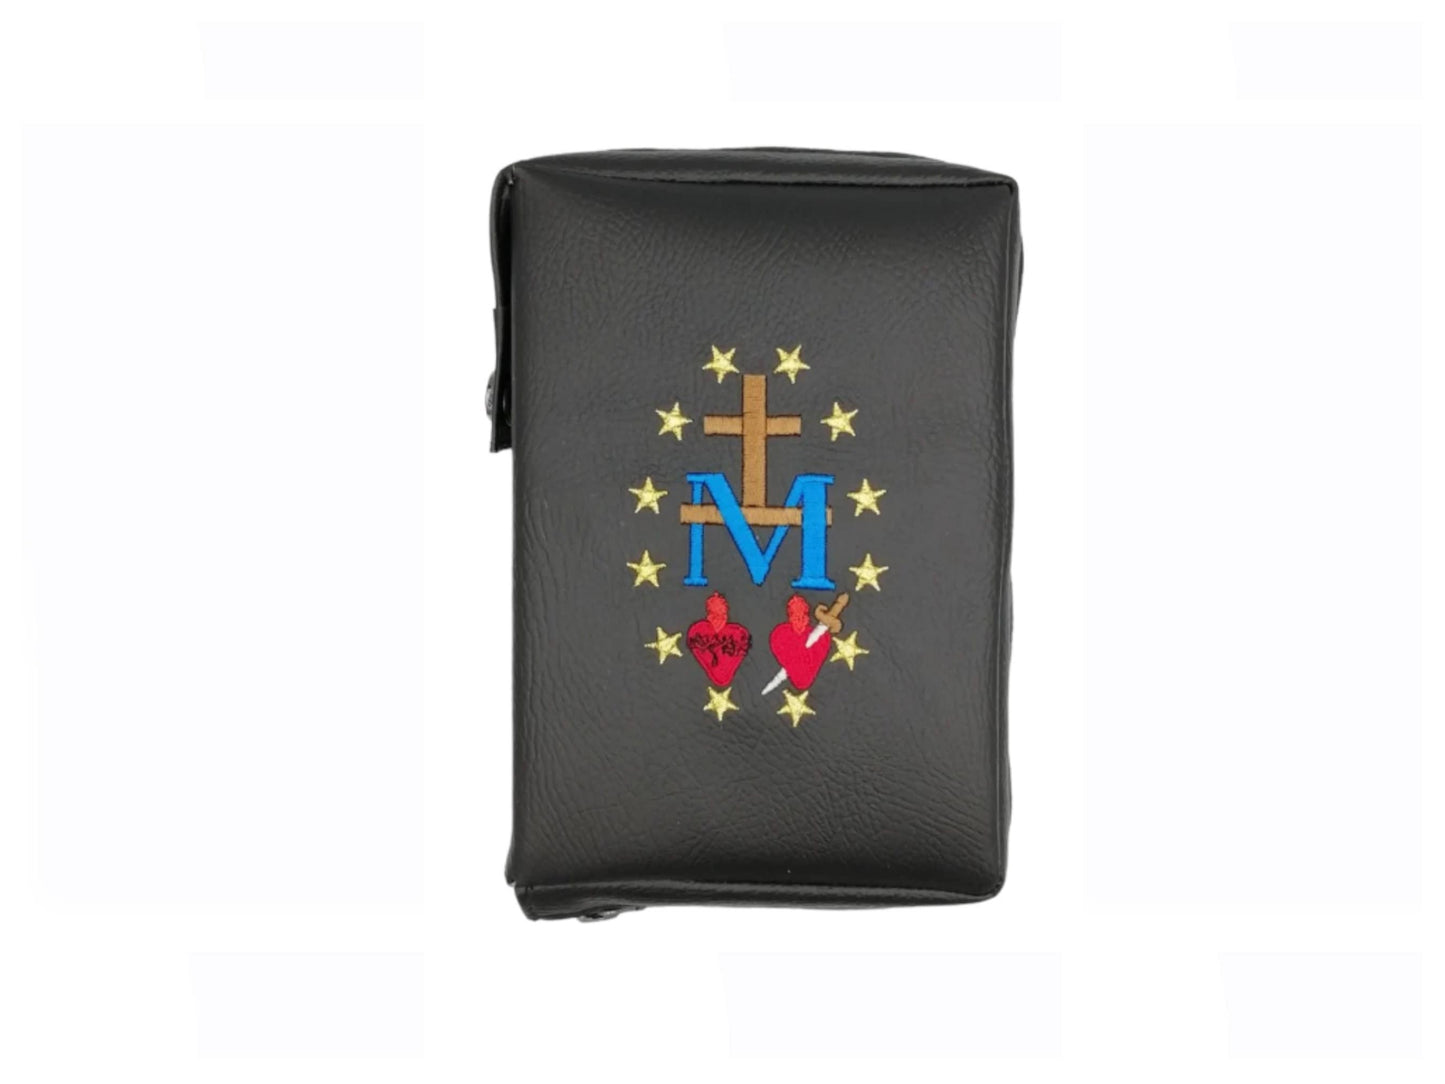 Zipped embroidered leather missal cover, book pouch, bible cover, bookworm book protector, breviary embroidered cover, personalised gift